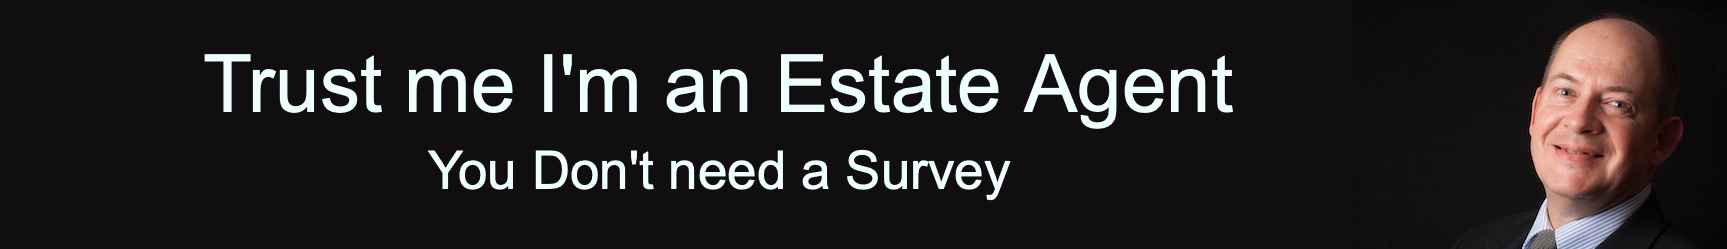 trust me I'm an estate agent you don't need a survey